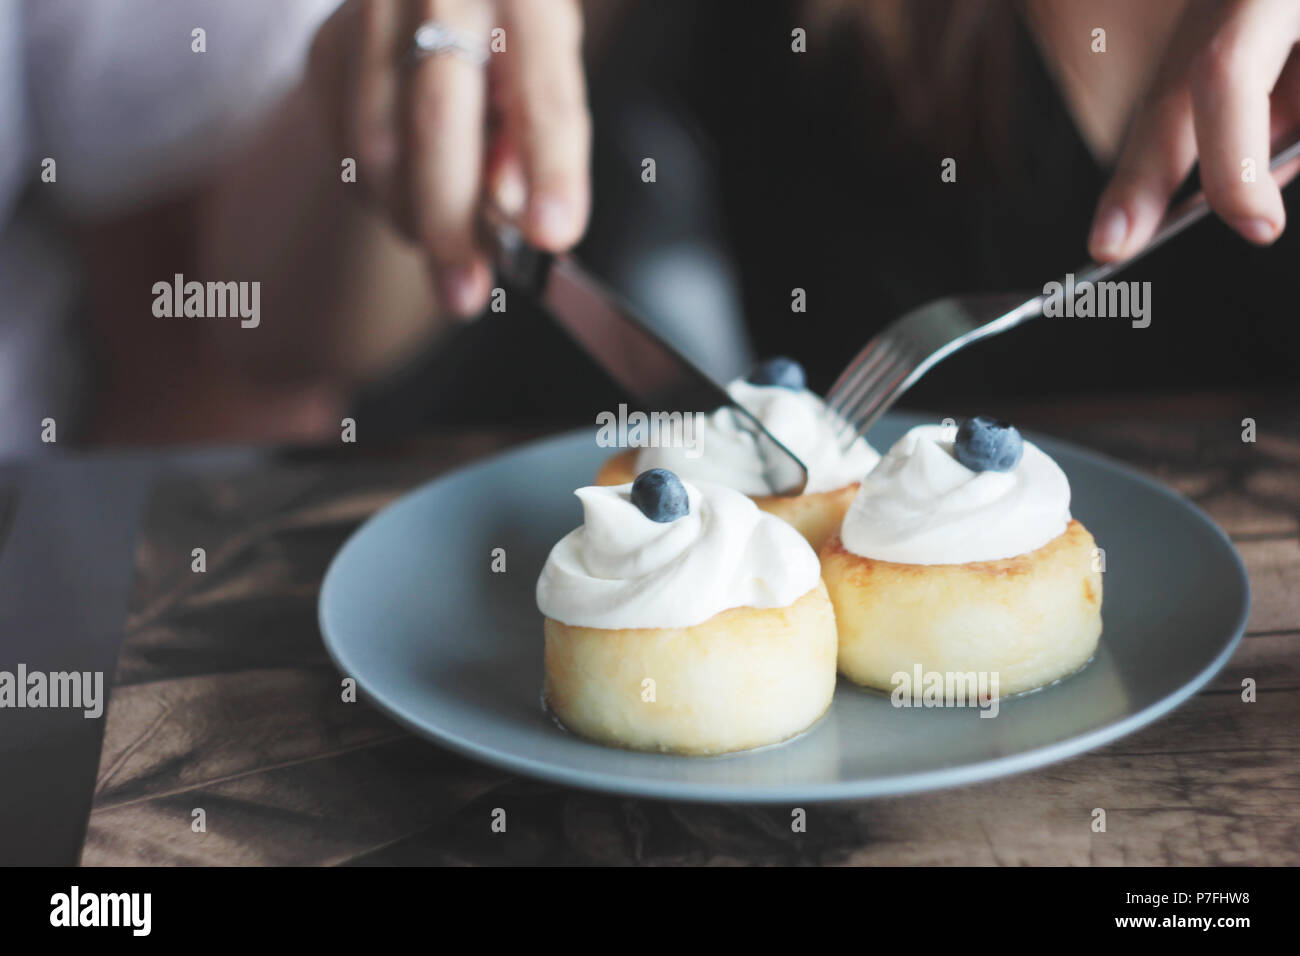 Cheesecakes with cream and blueberries on blue plate, women's hands with knife and fork Stock Photo